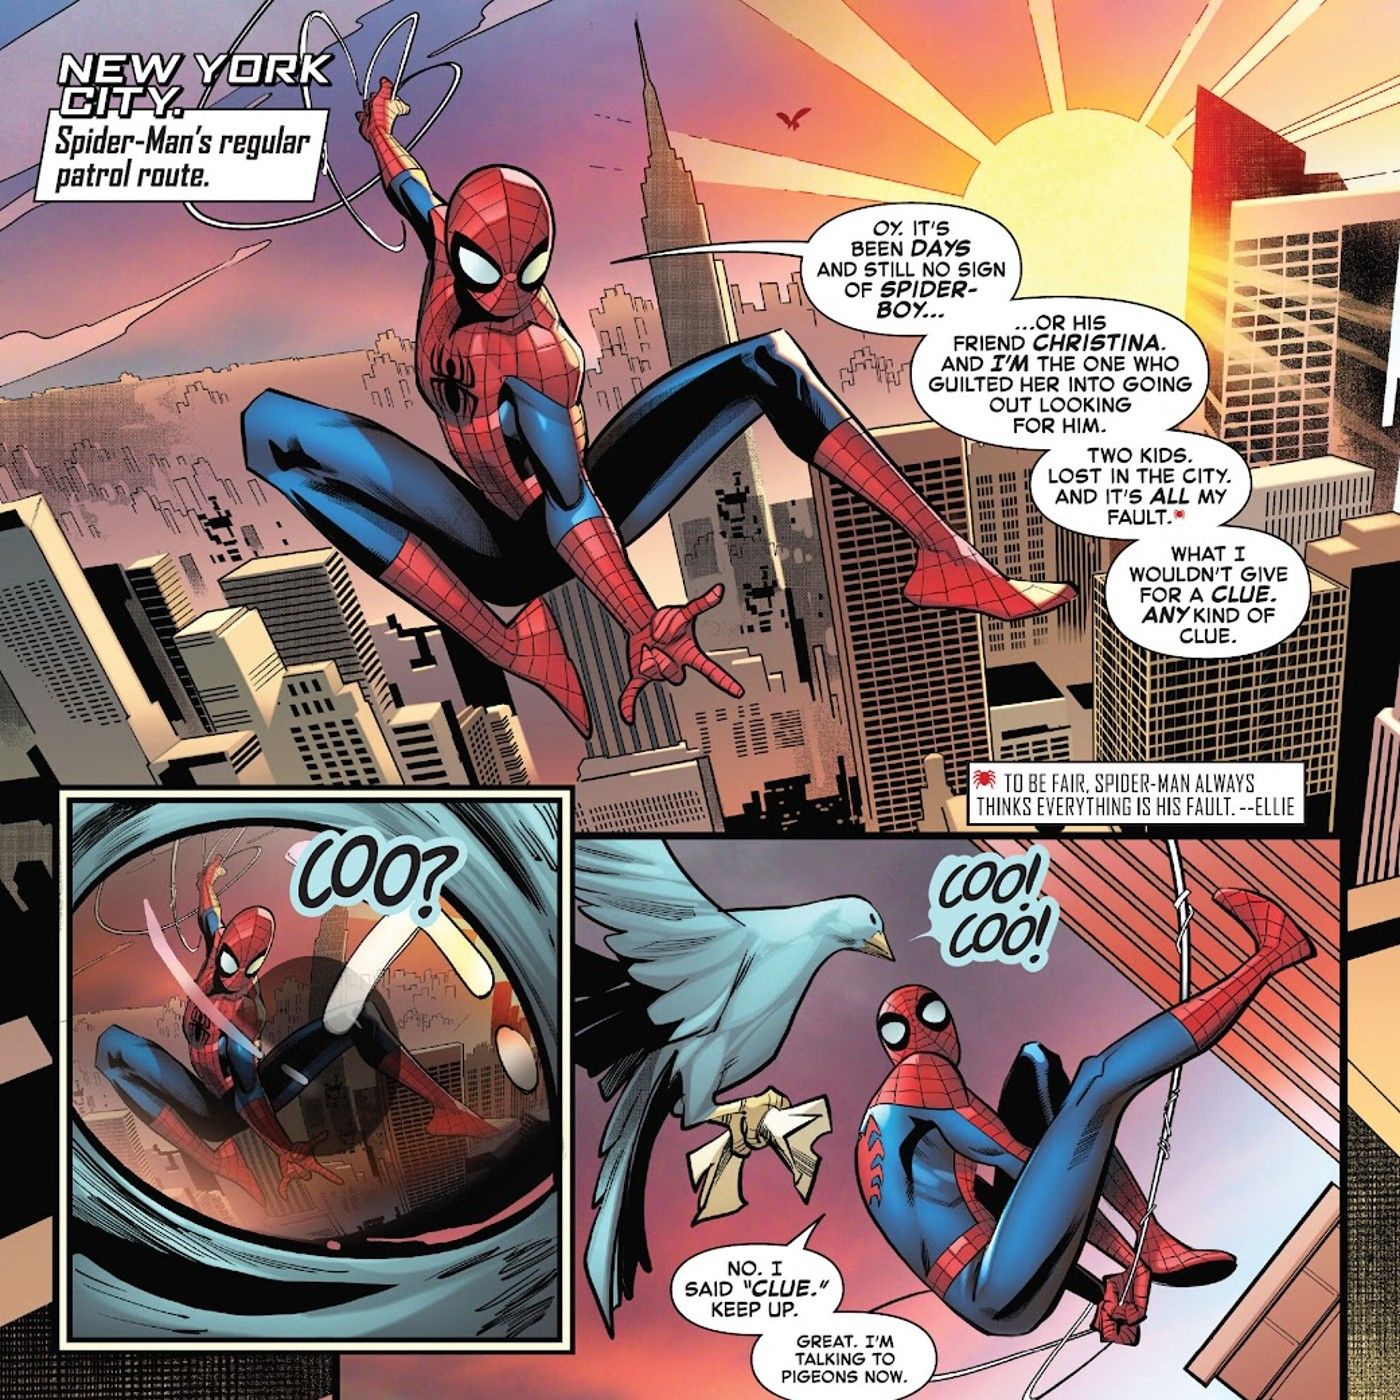 A pigeon helps Spider-Man look for a clue in Spider-Boy #7.